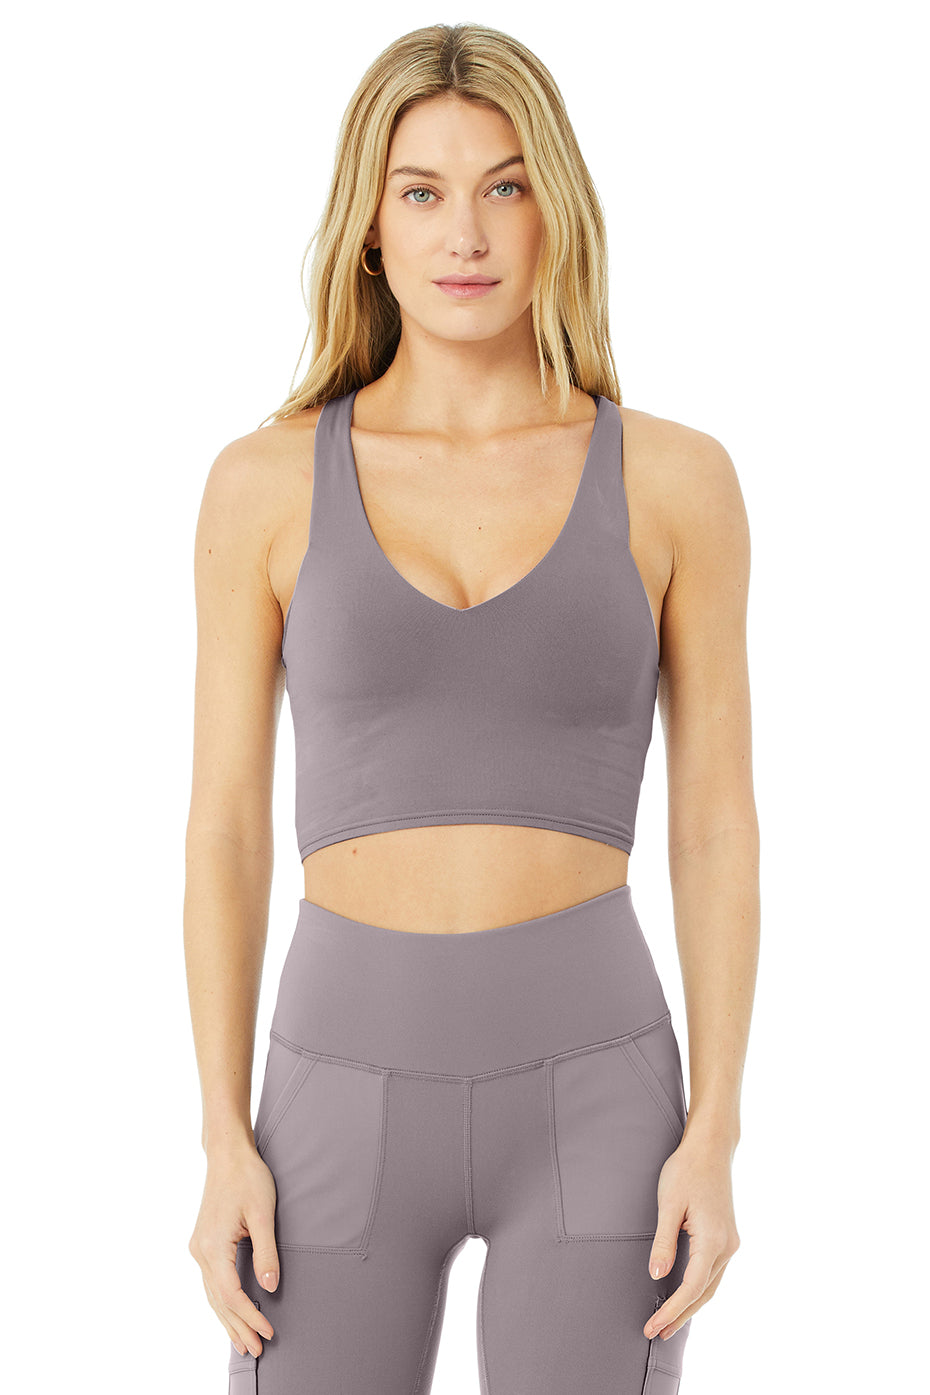 Airbrush Real Bra Tank Top in Purple Dusk by Alo Yoga | Ballet for